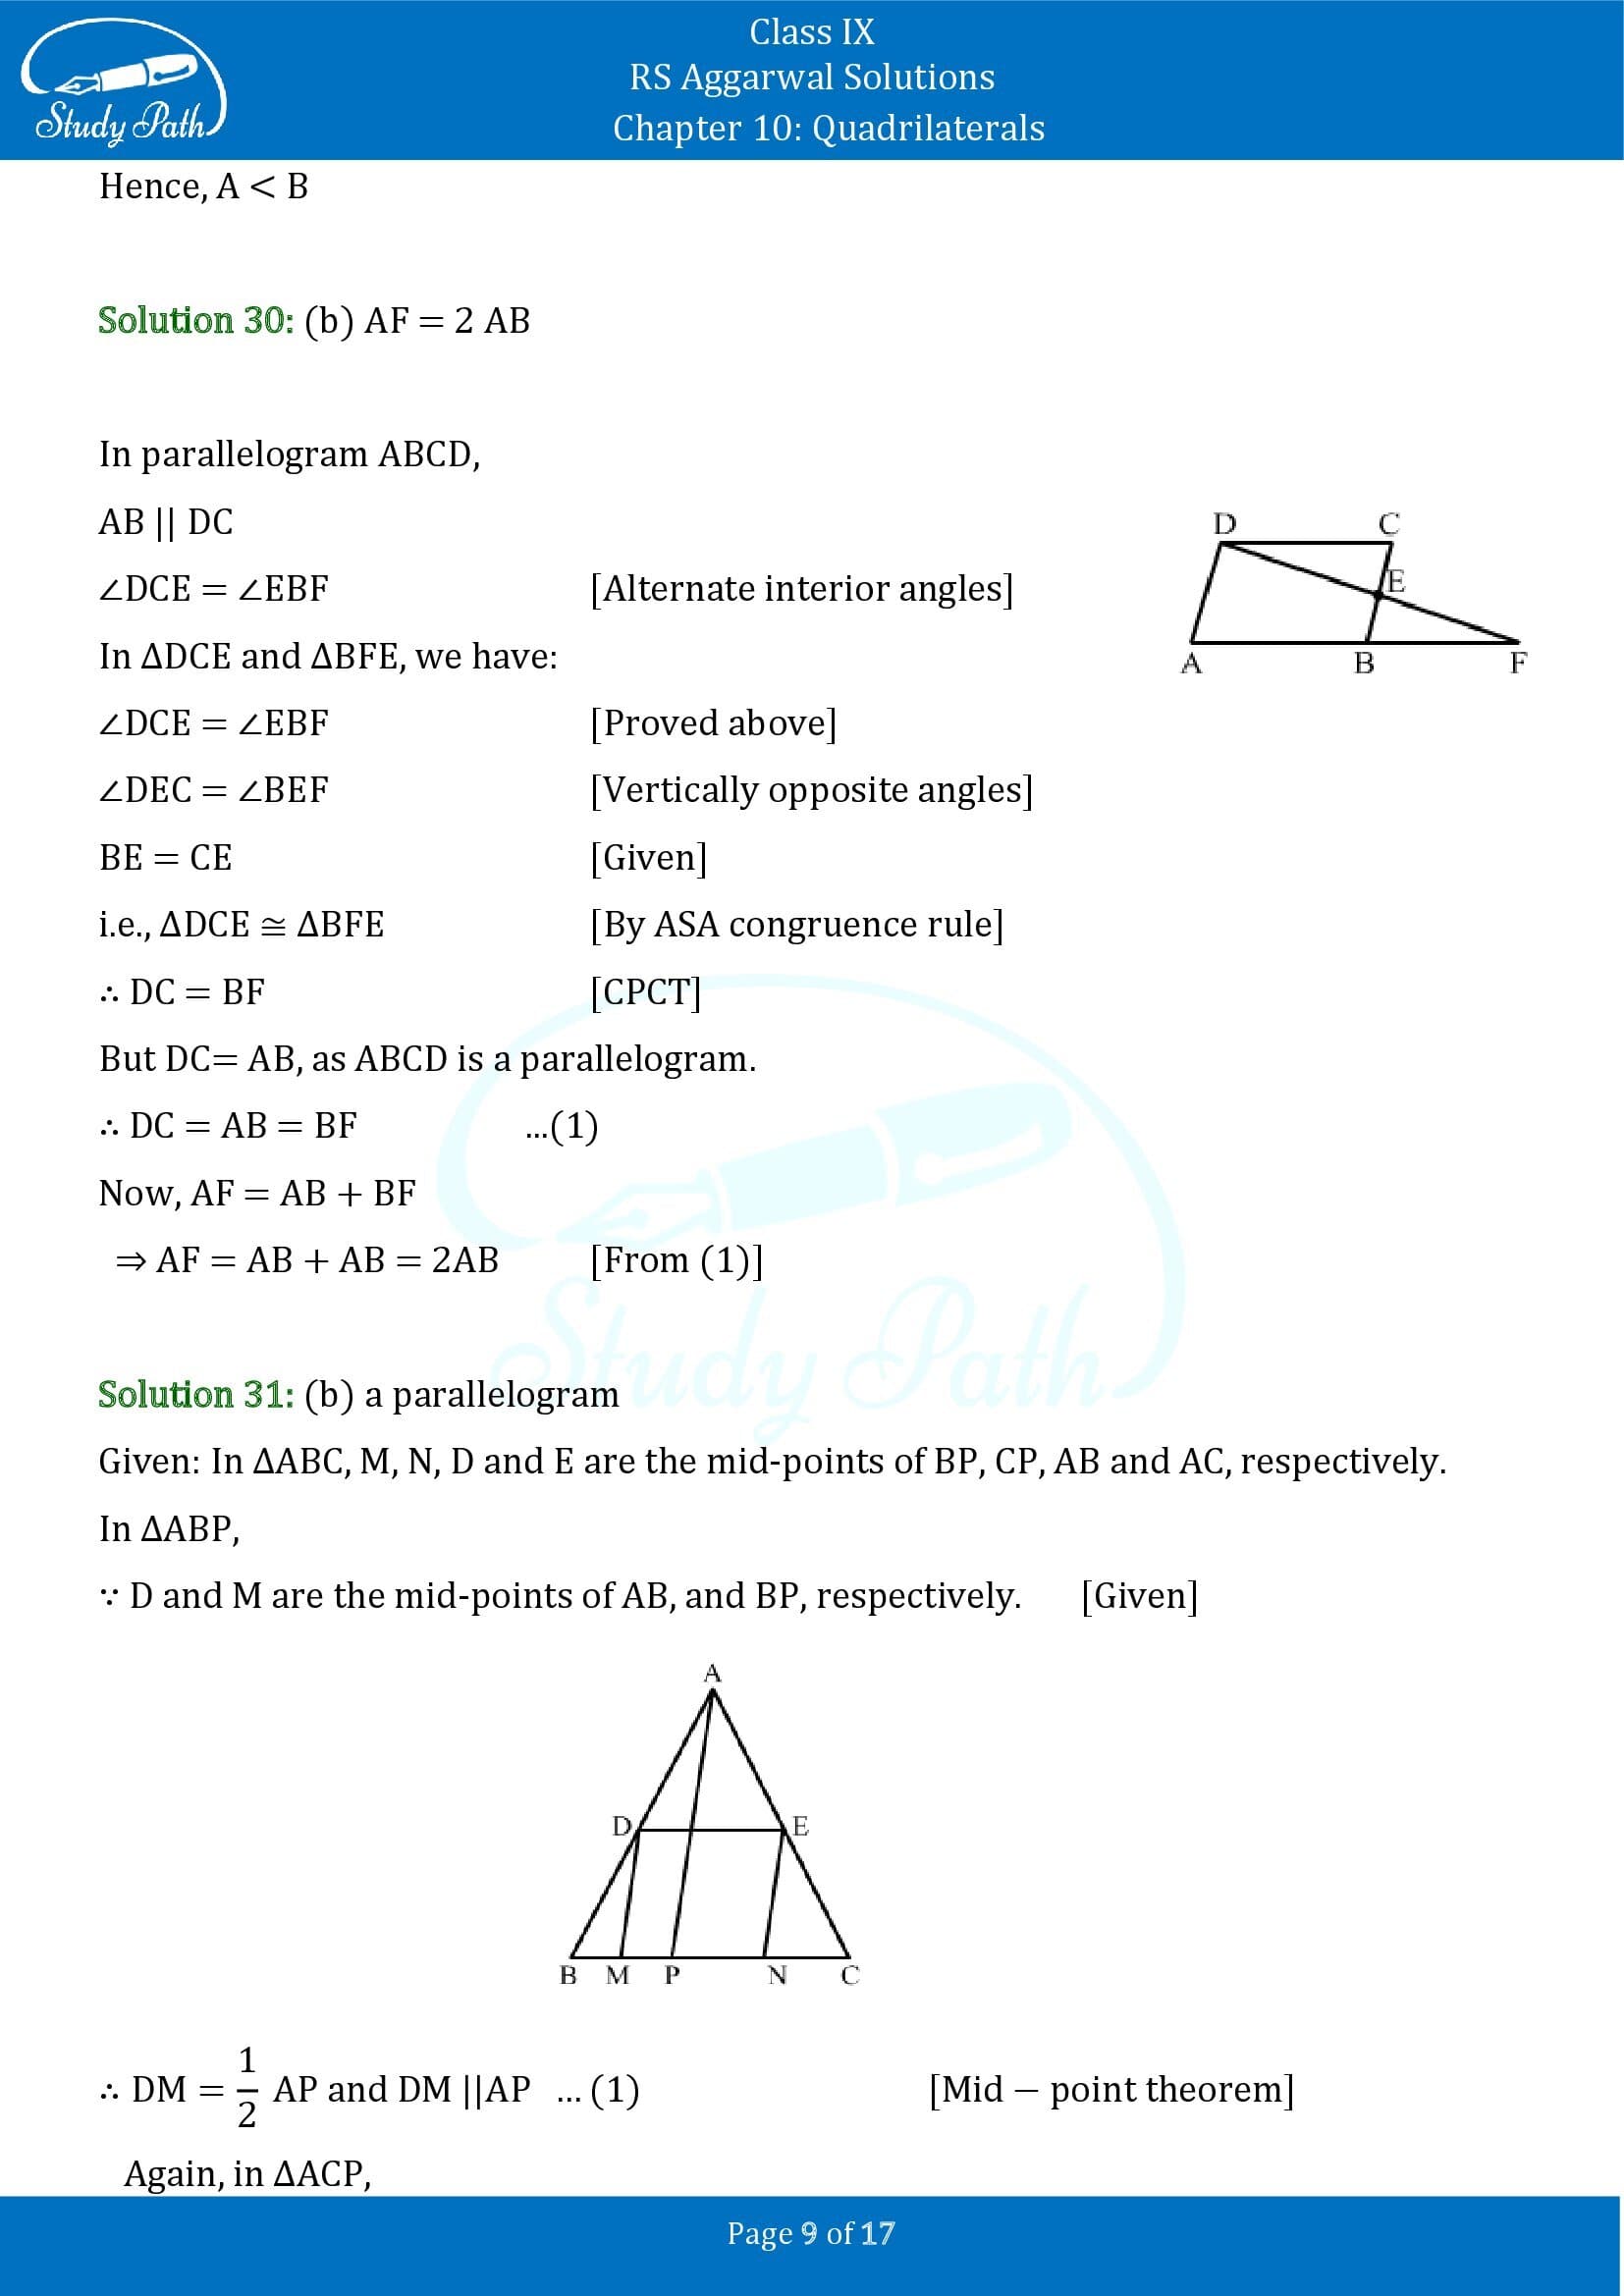 RS Aggarwal Solutions Class 9 Chapter 10 Quadrilaterals Multiple Choice Questions MCQs 00009